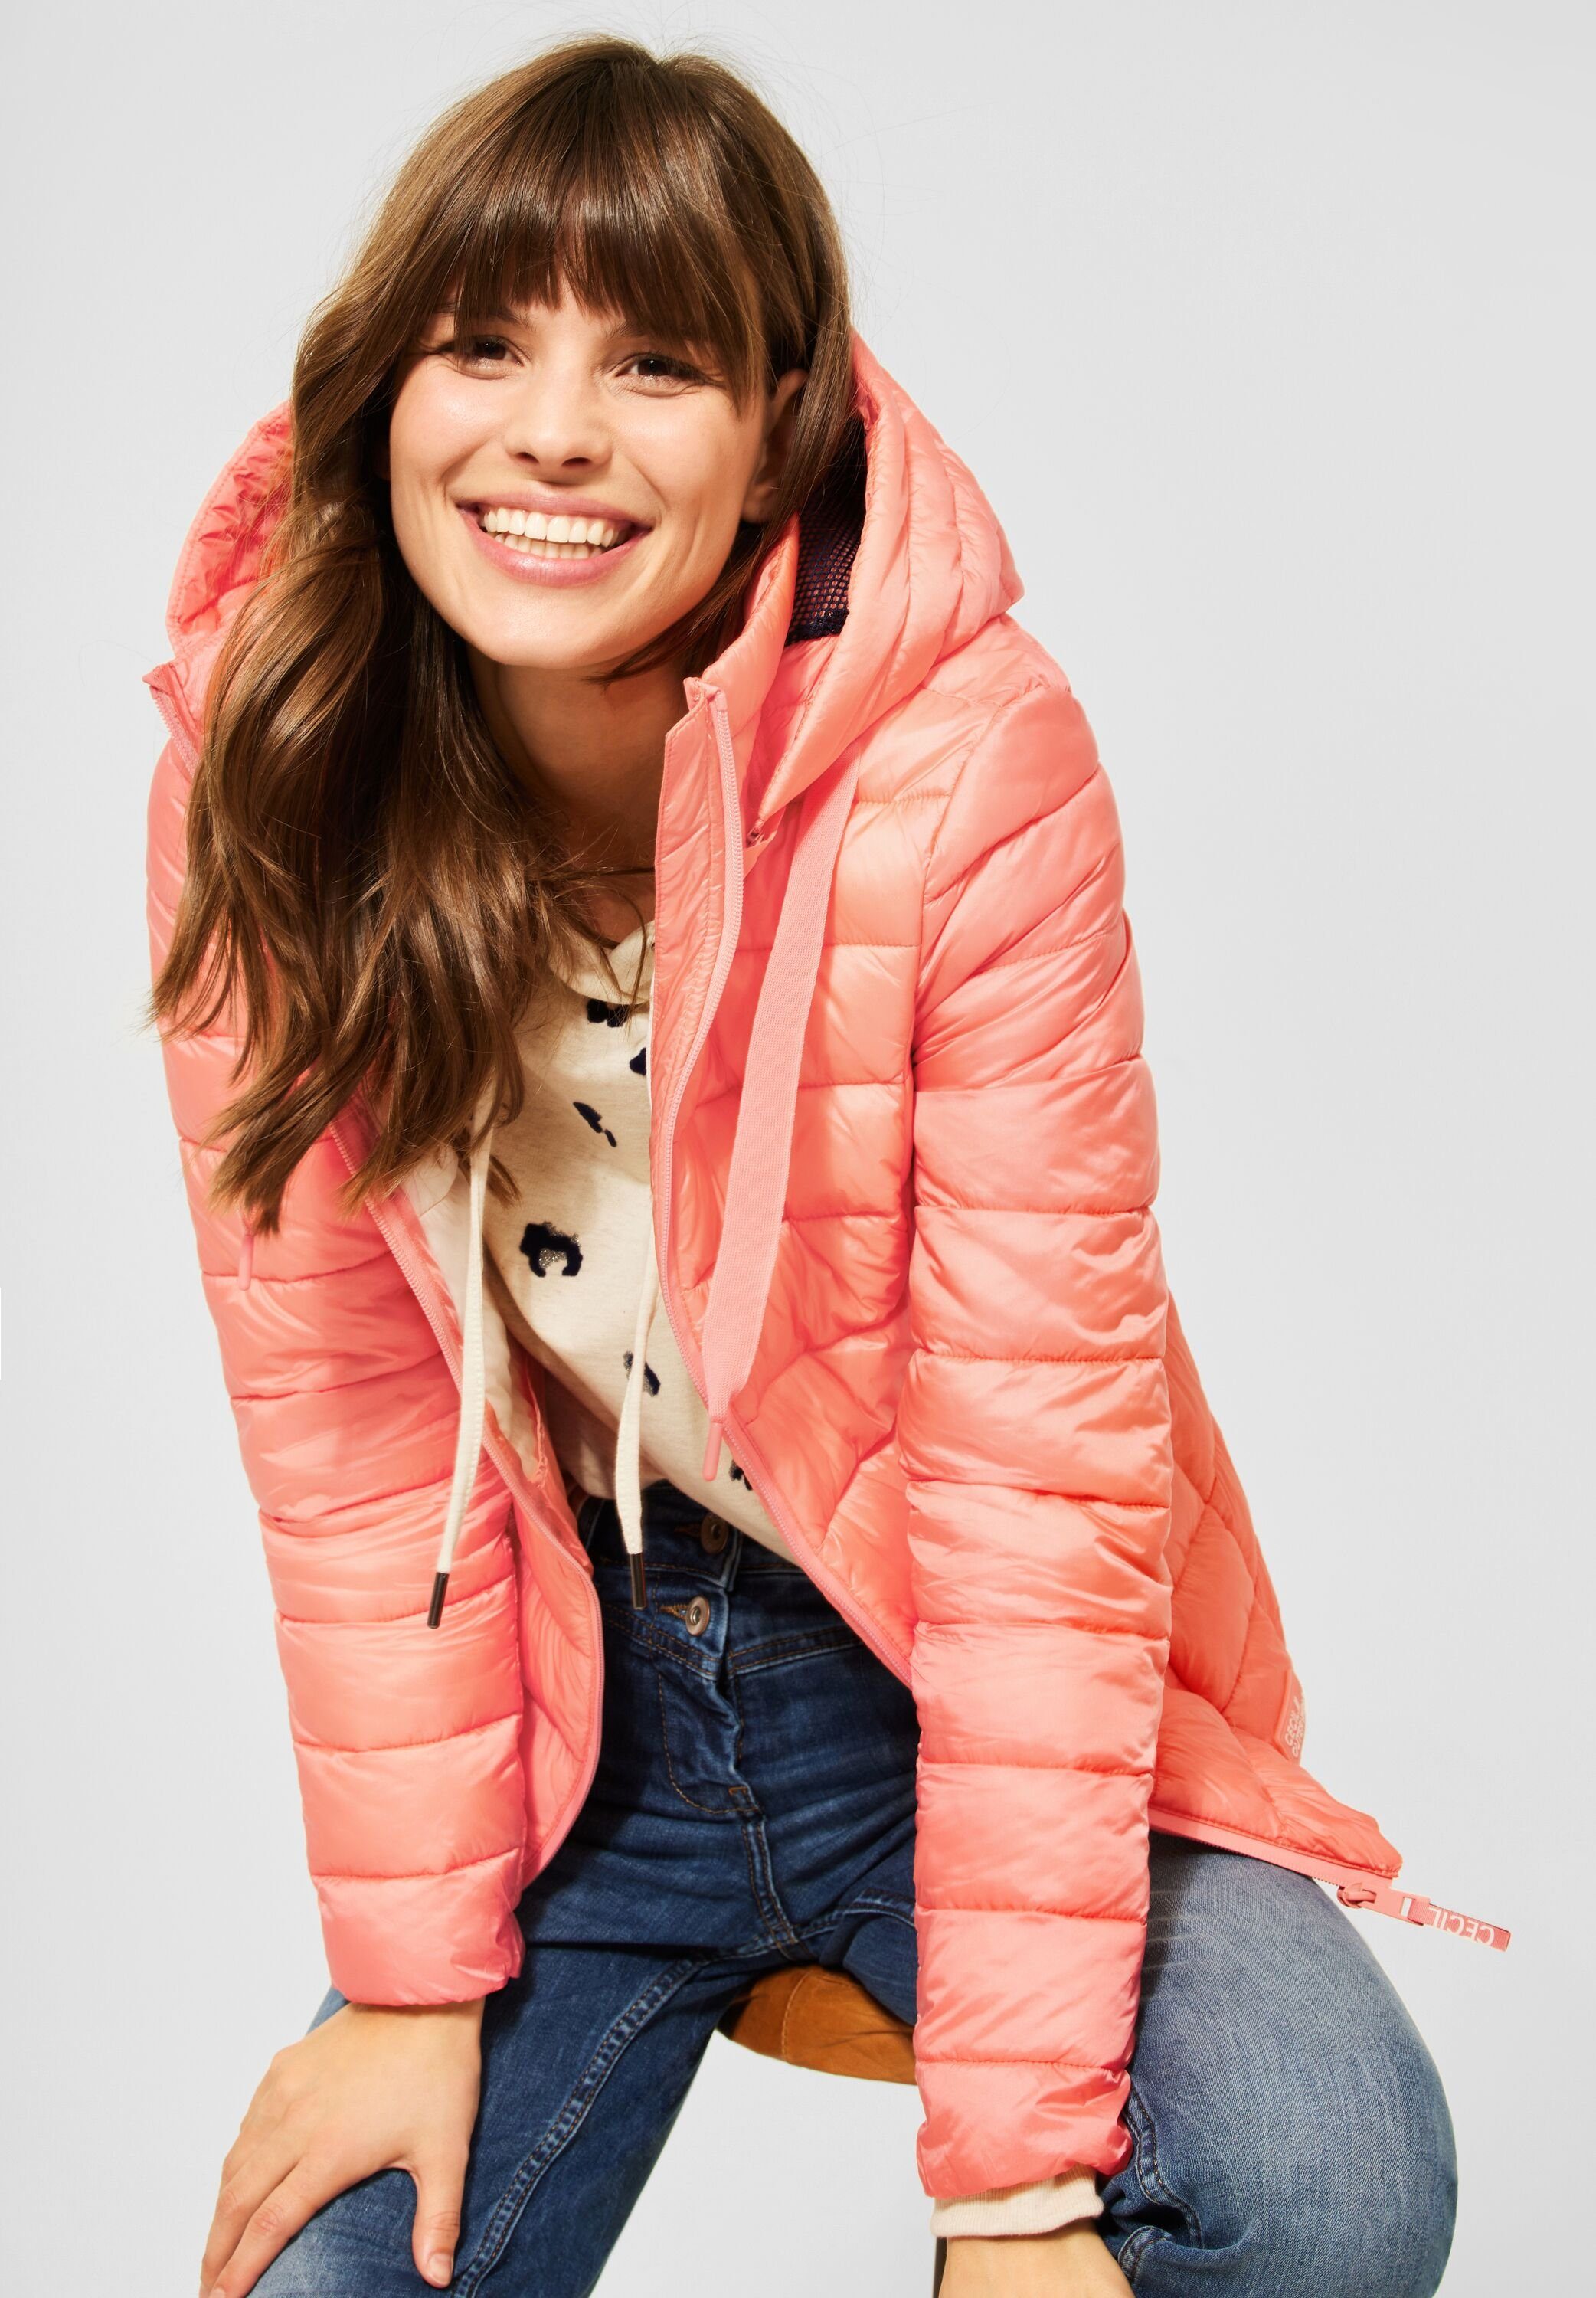 Cecil Outdoorjacke Nylon, Jacke Cecil 100% Futter Outdoor Nylon, Gesteppte Taschen, in Polyester 100% Obermaterial Material: Futter Rose (1-St) 100% Grapefruit